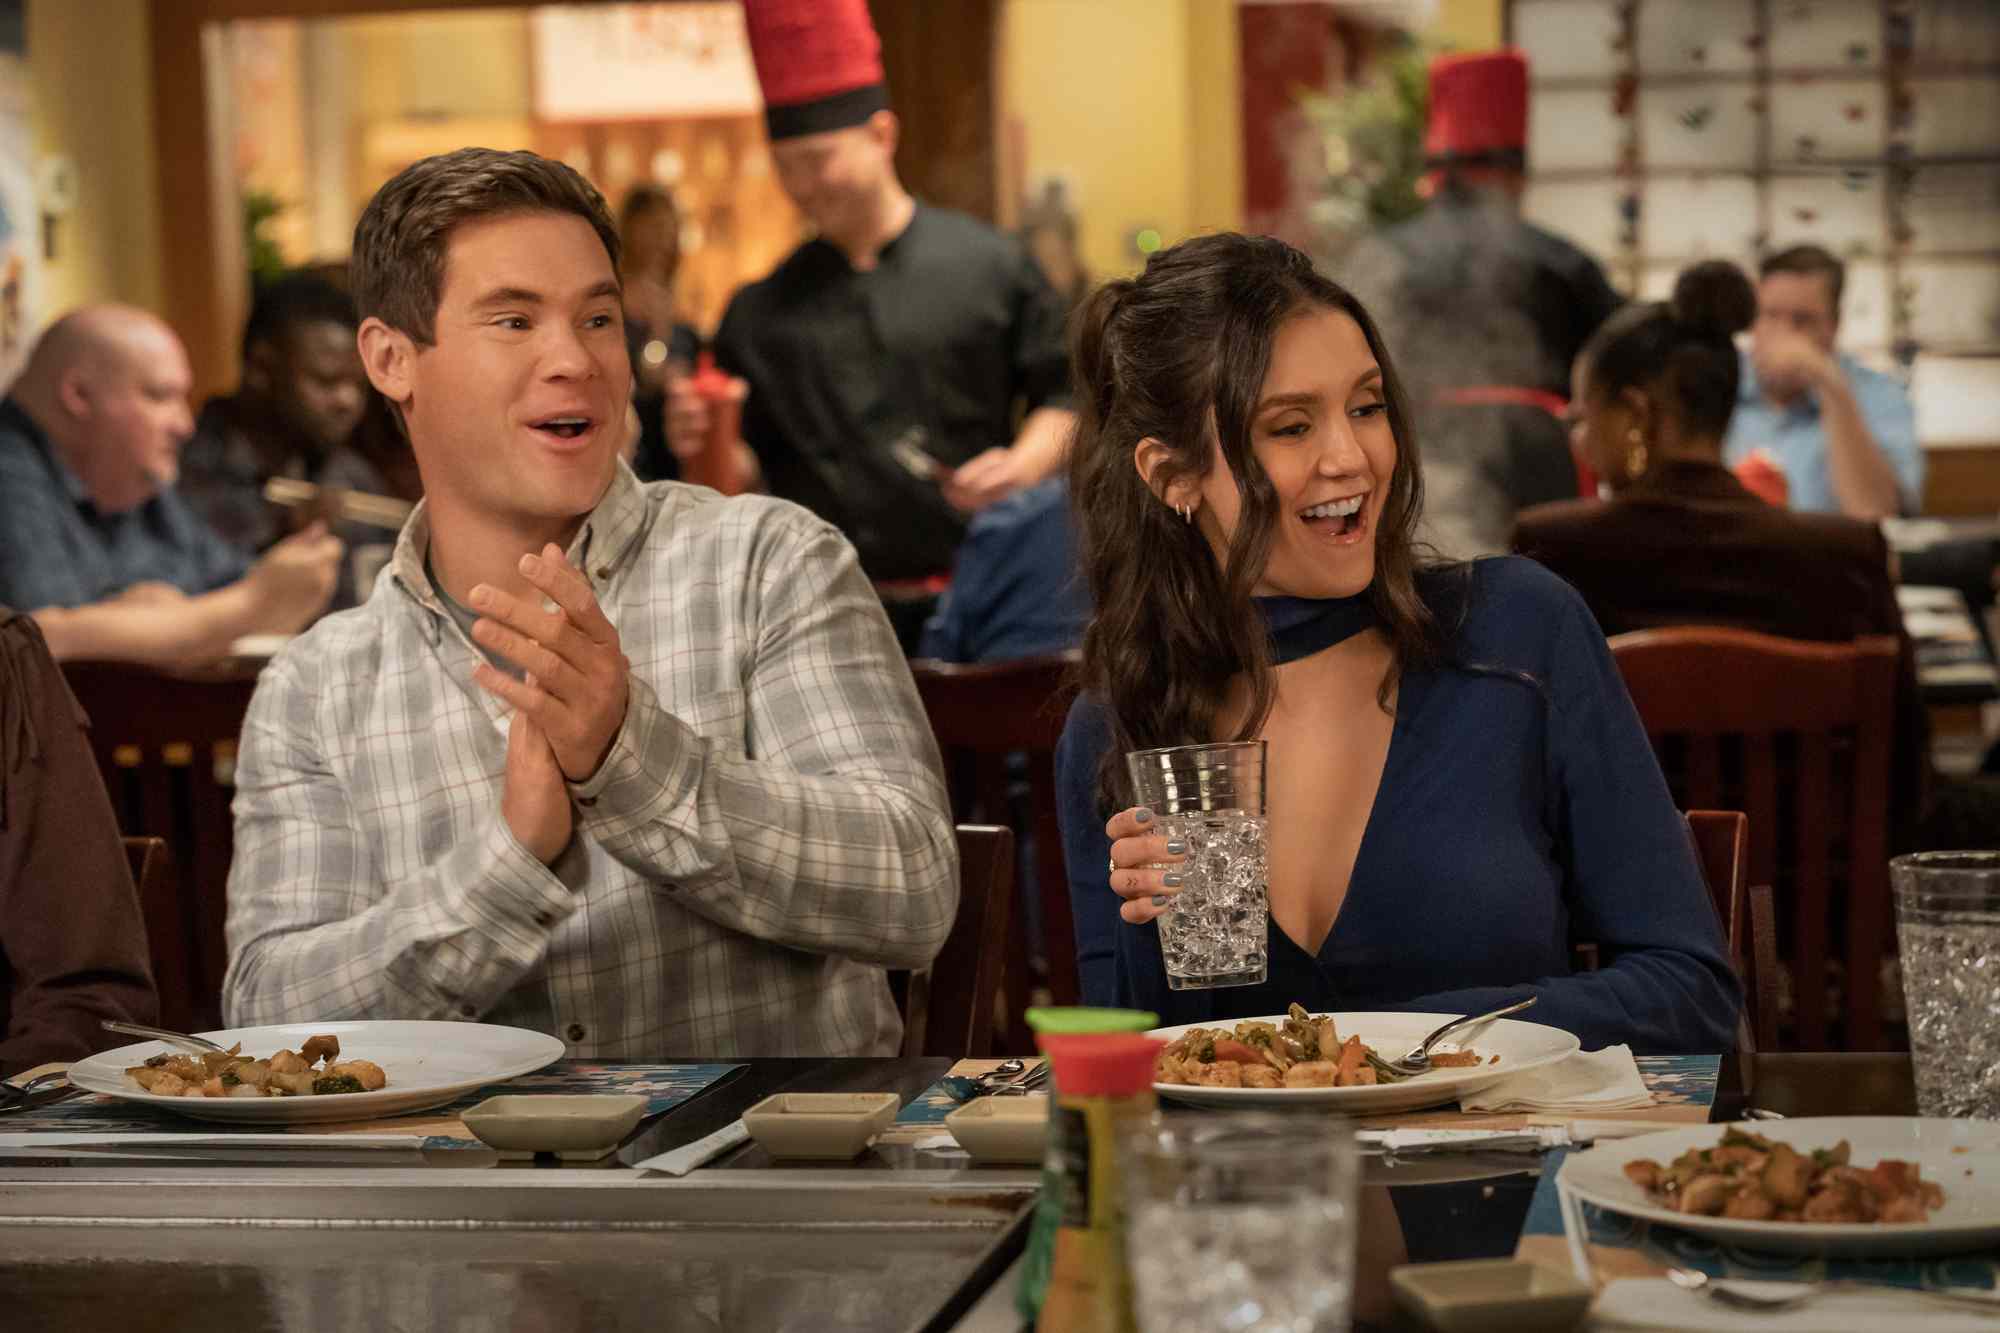 Adam Devine as Owen Browning, Nina Dobrev as Parker McDermott in The Out-Laws